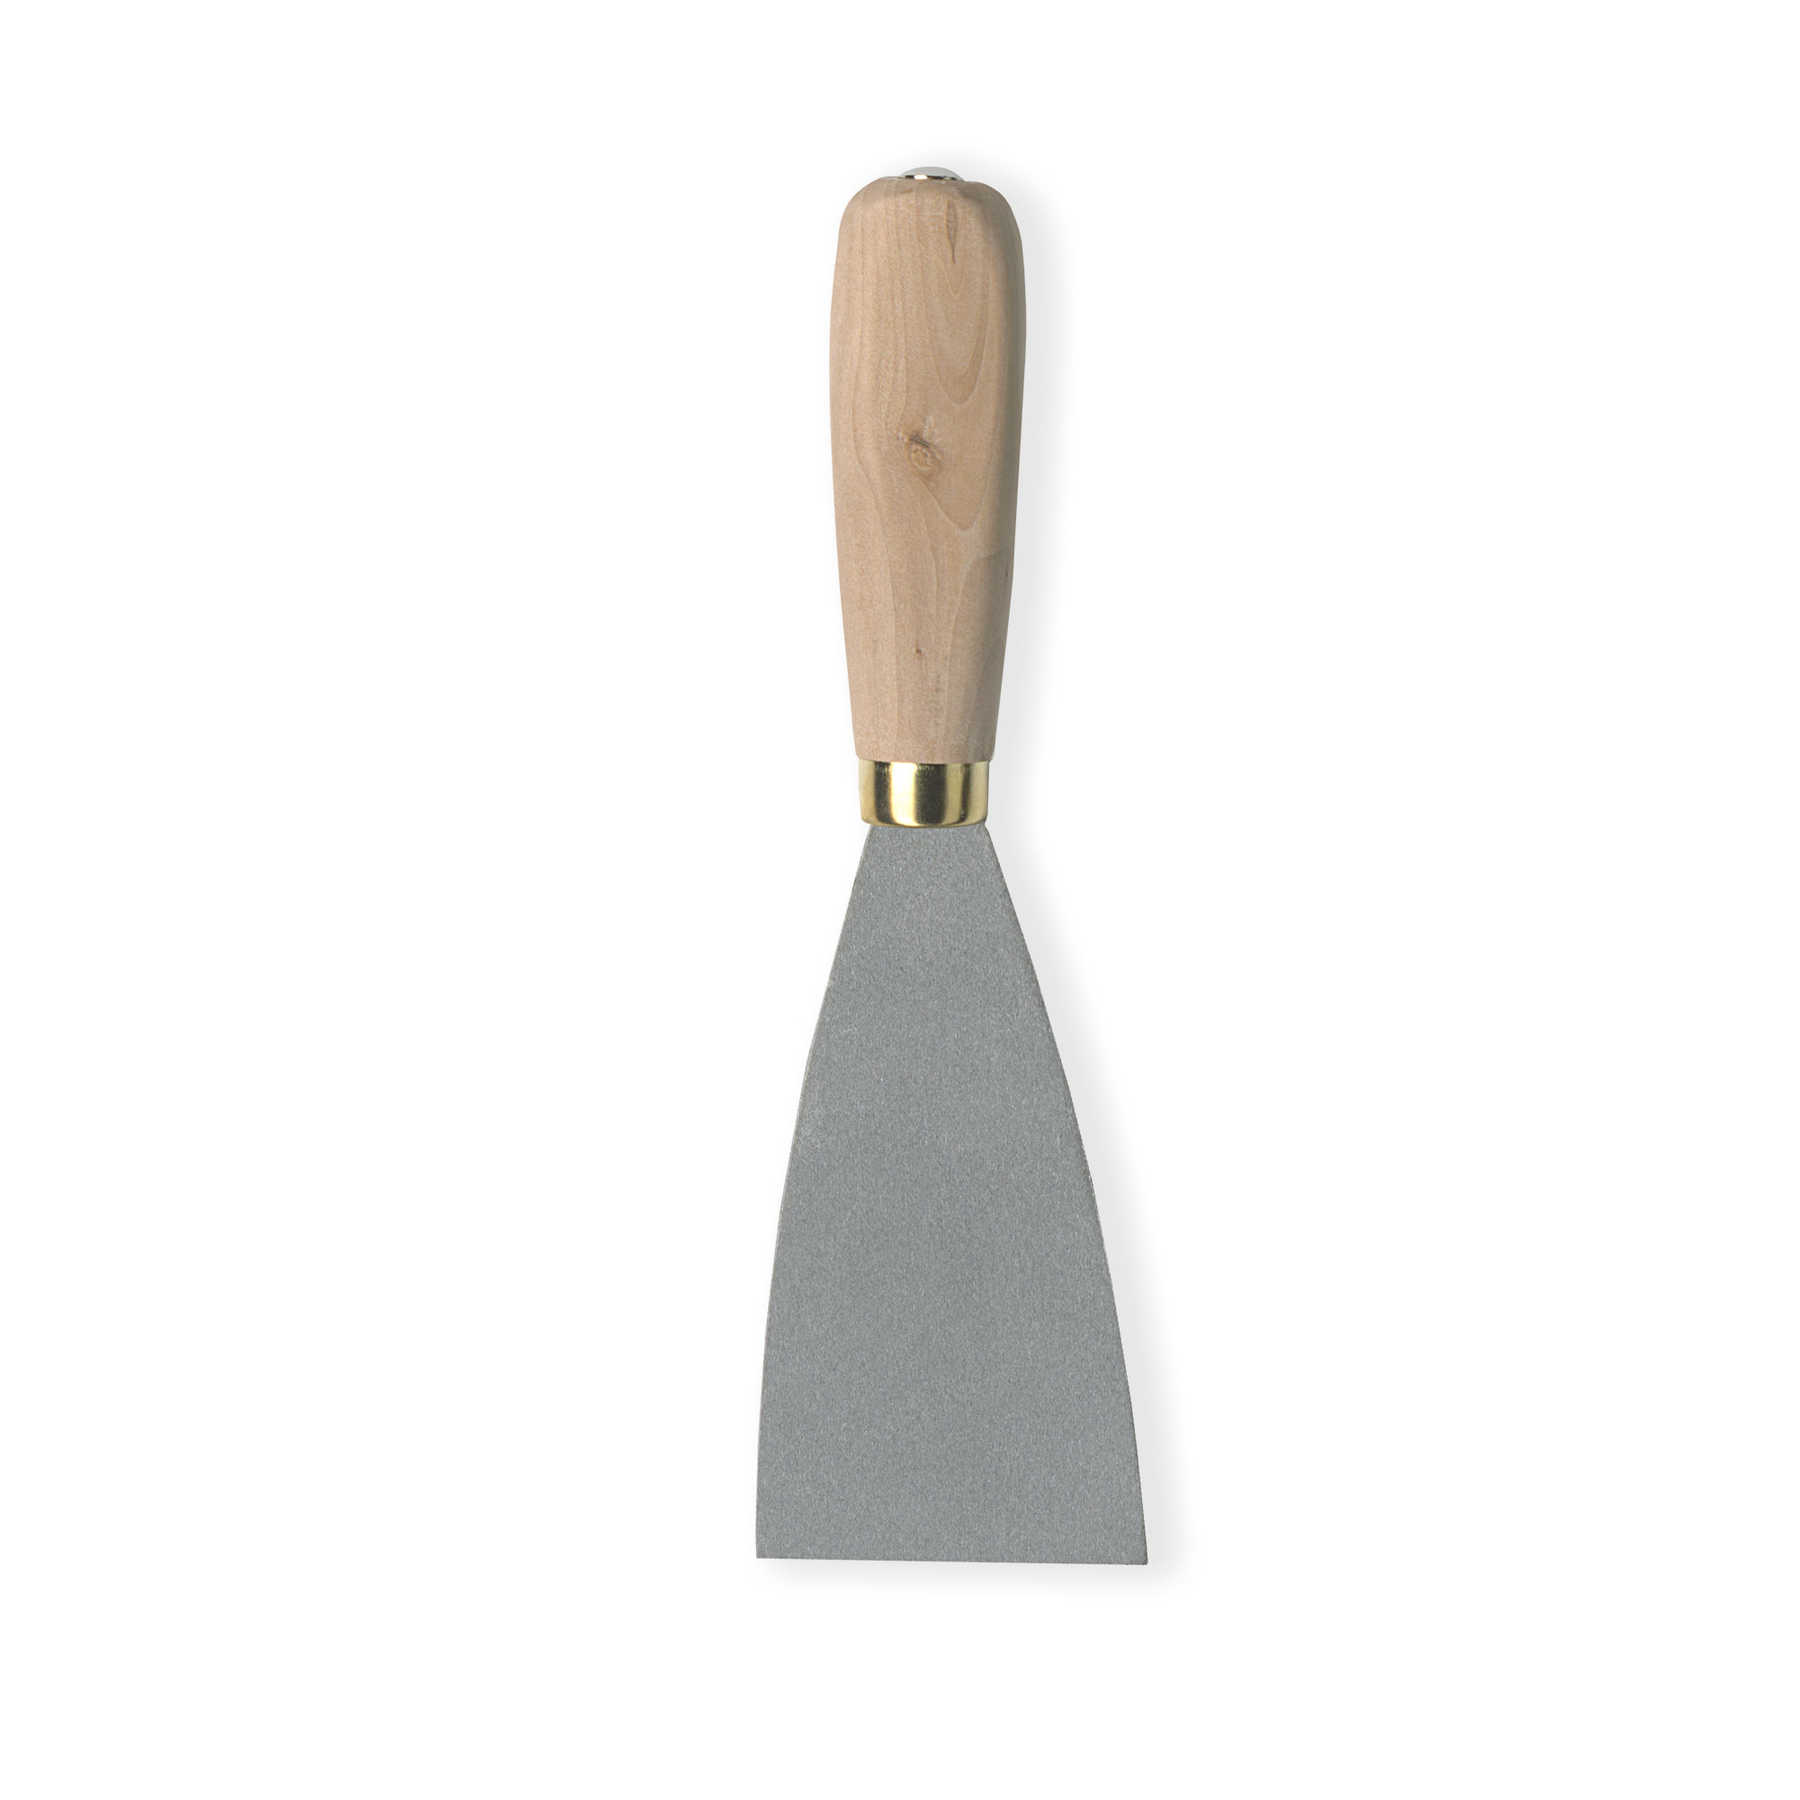         Painter spatula 6cm steel blade and wooden handle
    